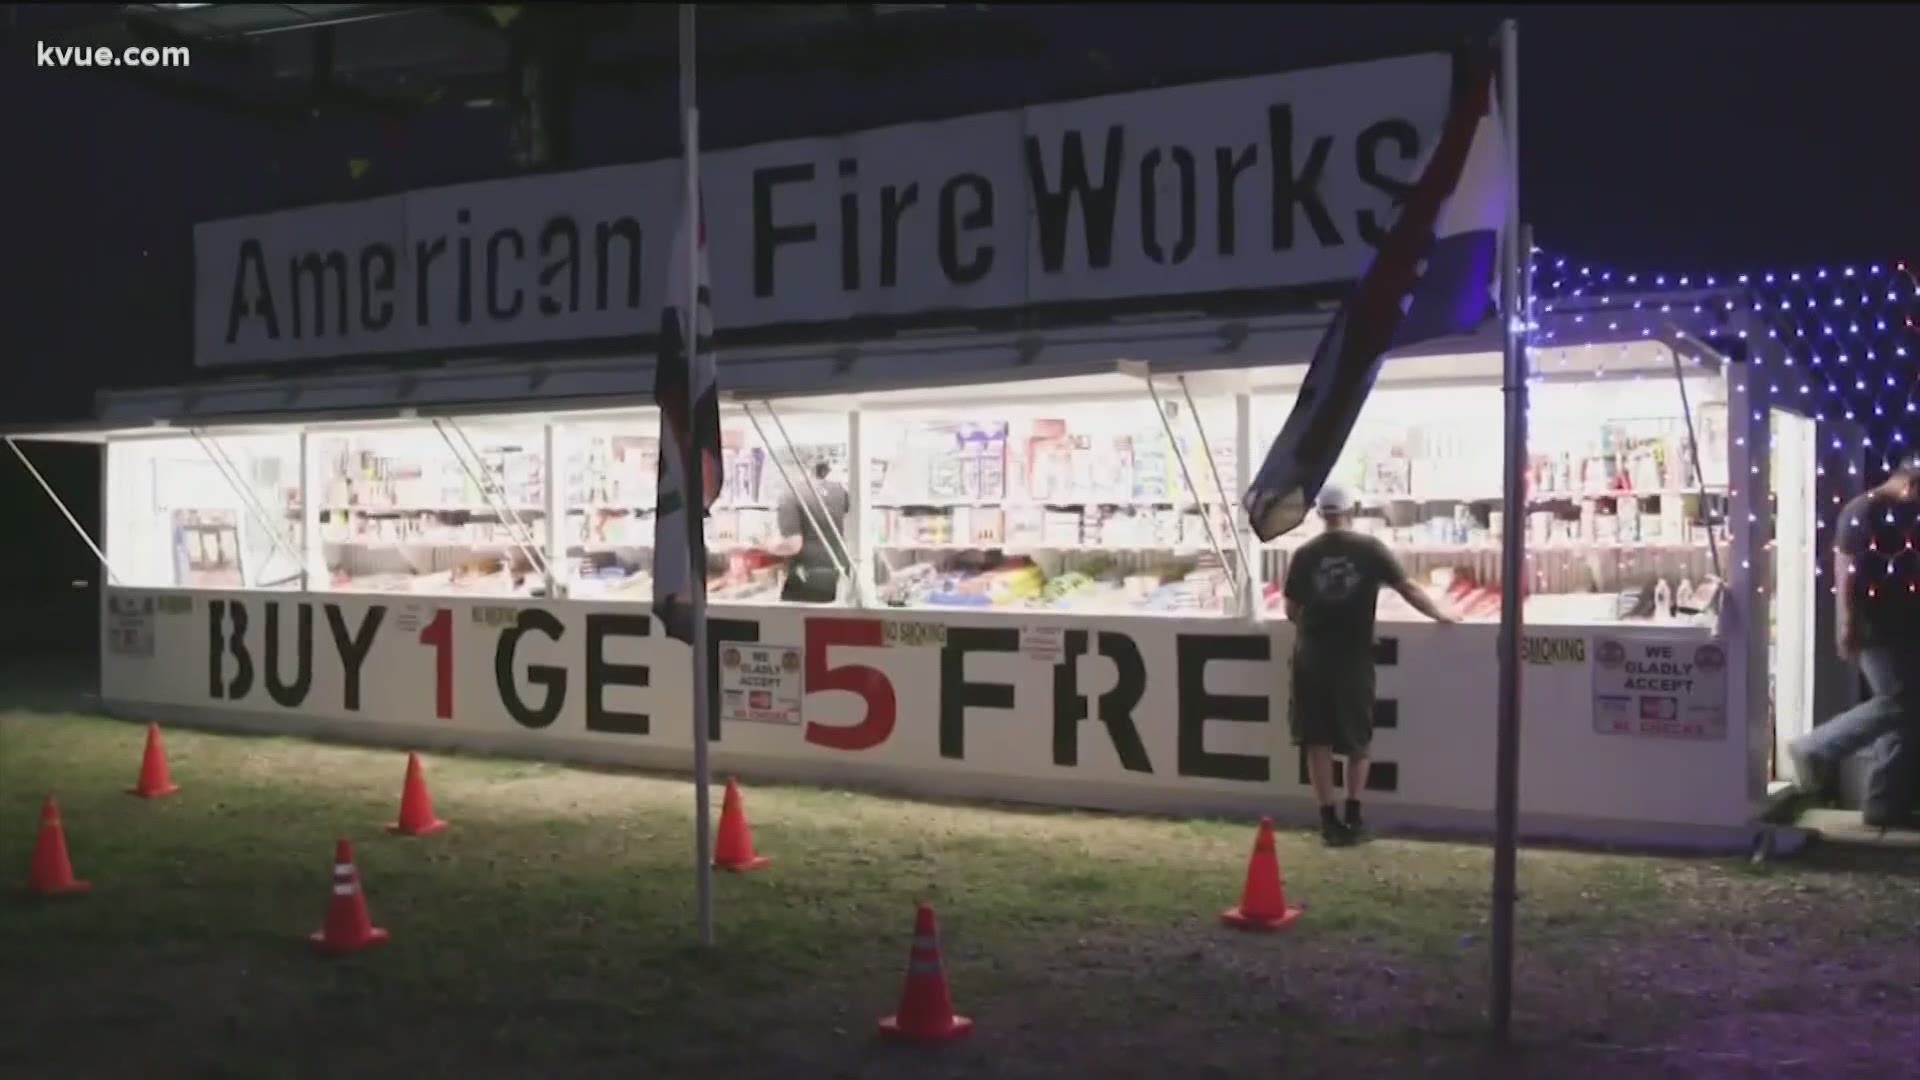 Right before the holiday weekend, fireworks experts warn residents to buy their supply early.